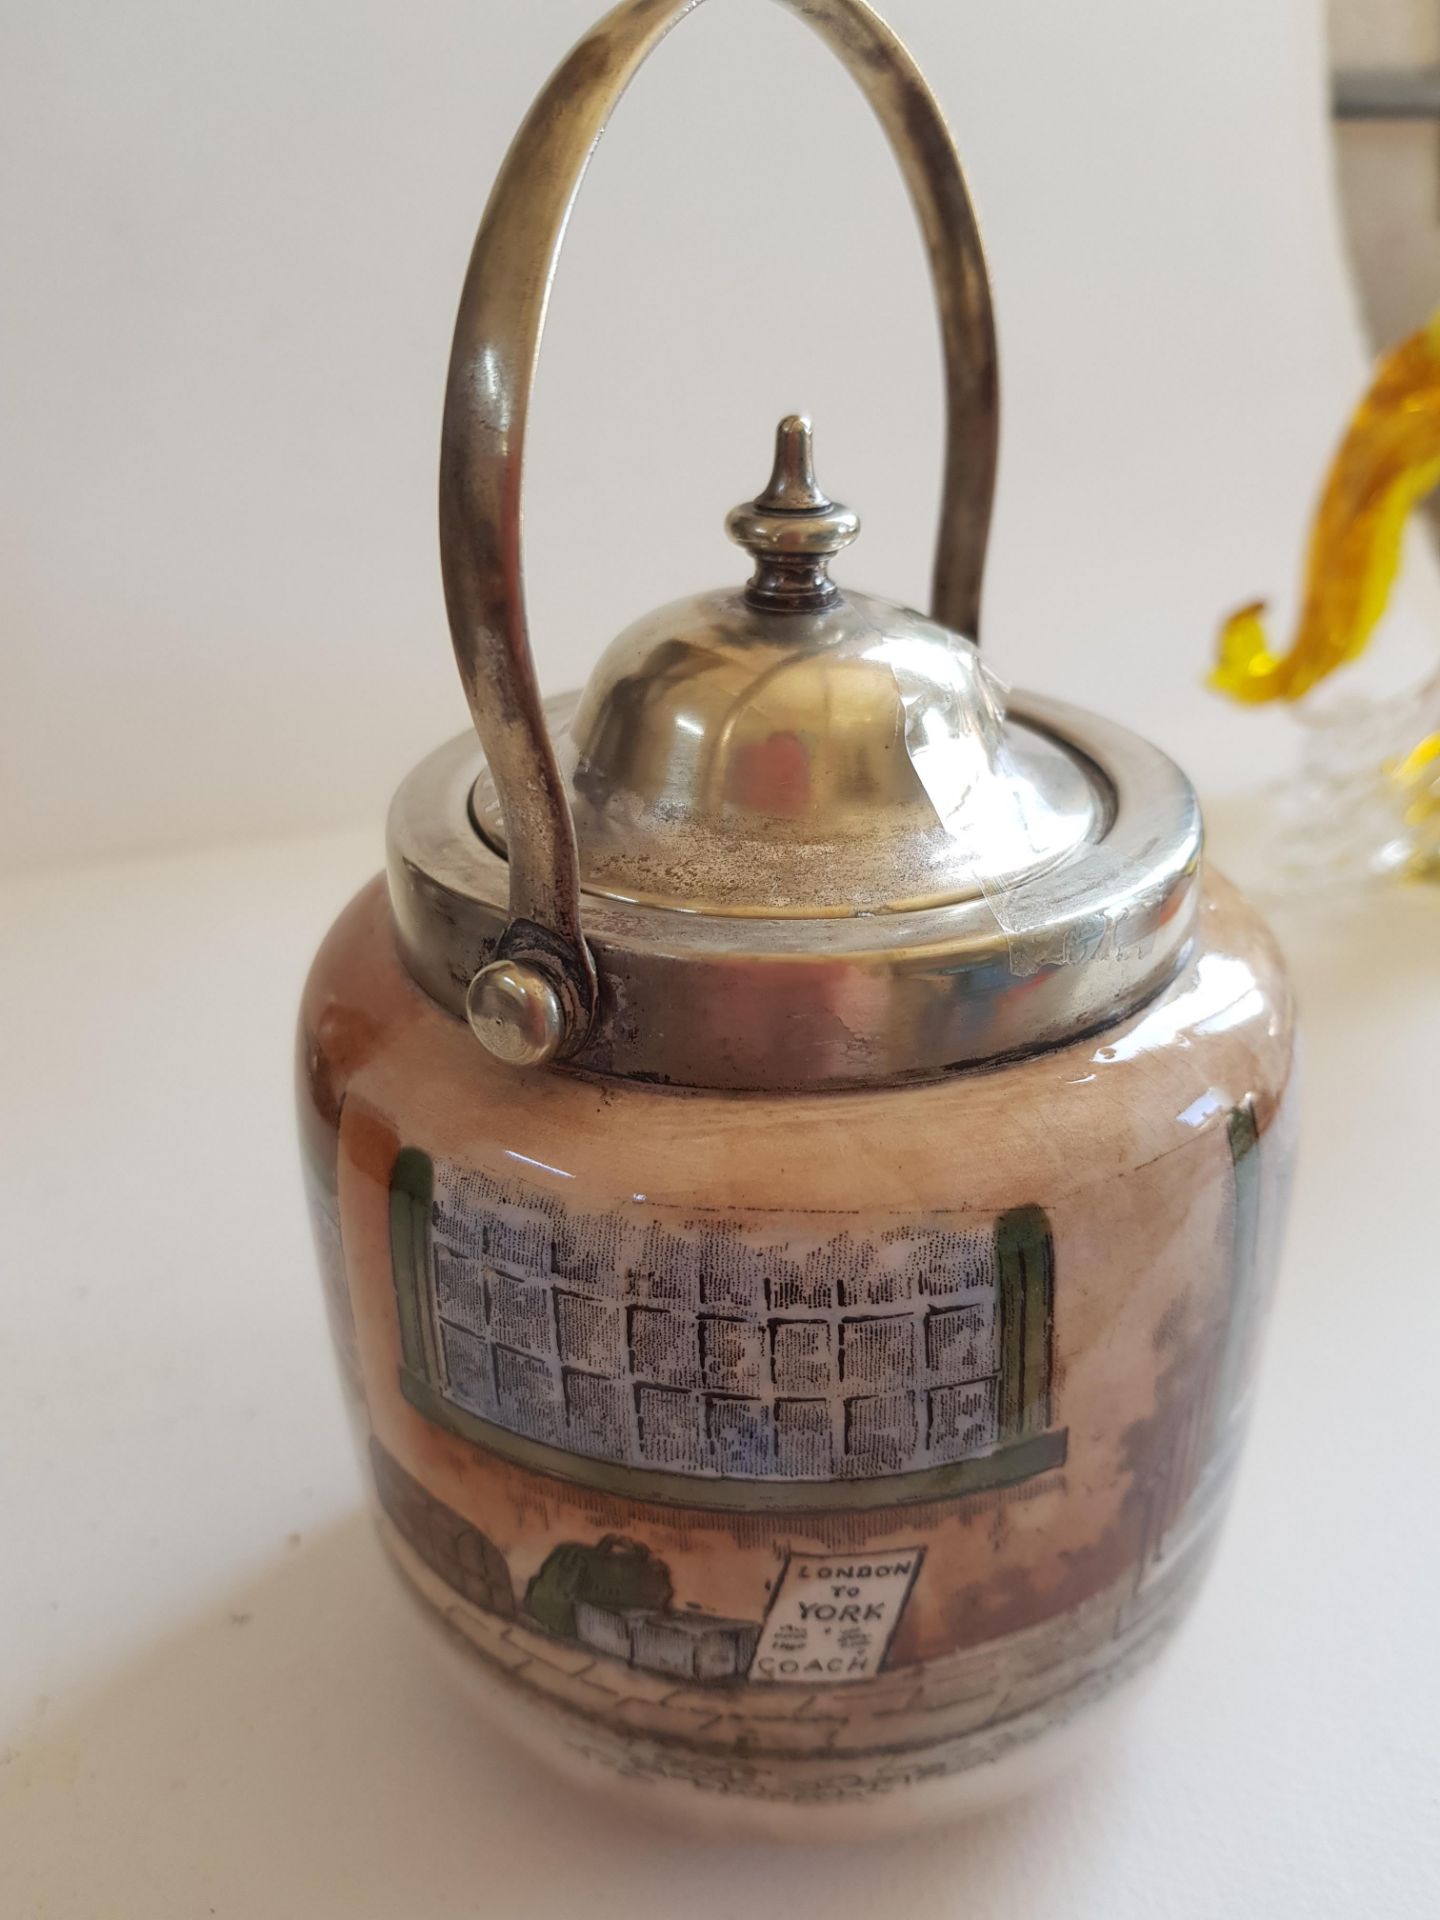 Vintage Royal Doulton Jam Pot With A Magnifying Glass And A Glass Bird - Image 2 of 7